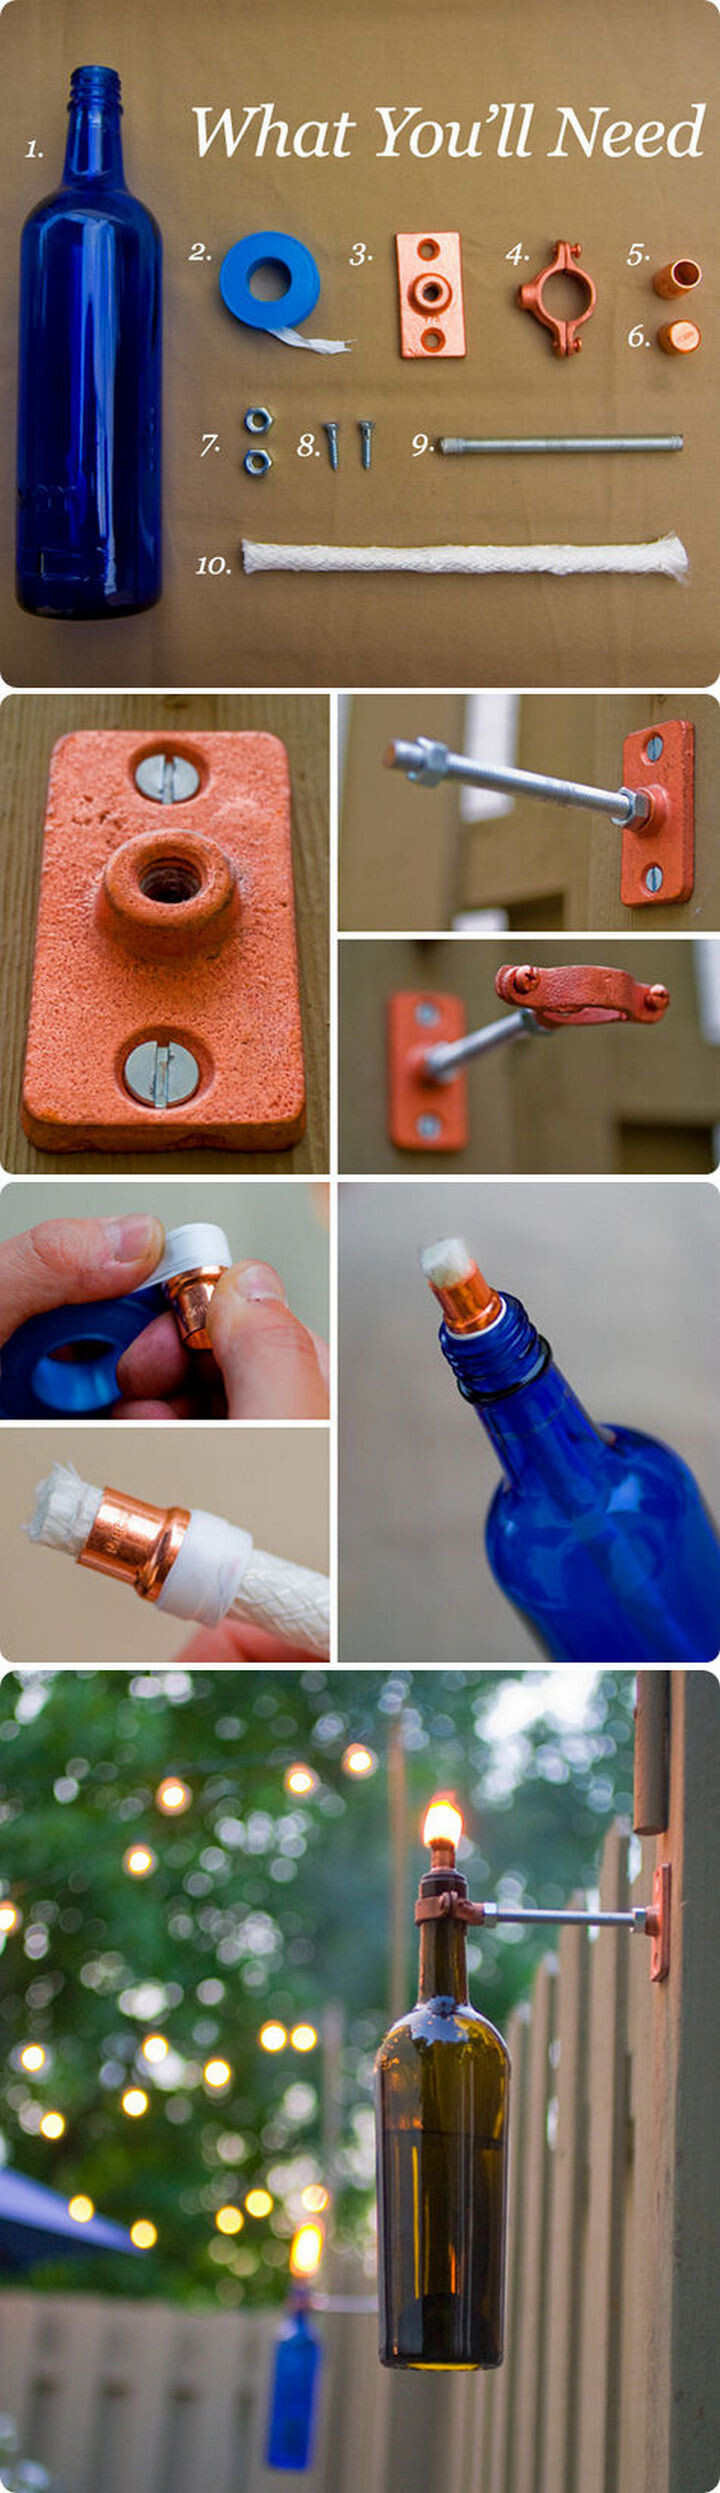 10) Create tiki torches with wine bottles for those warm summer nights